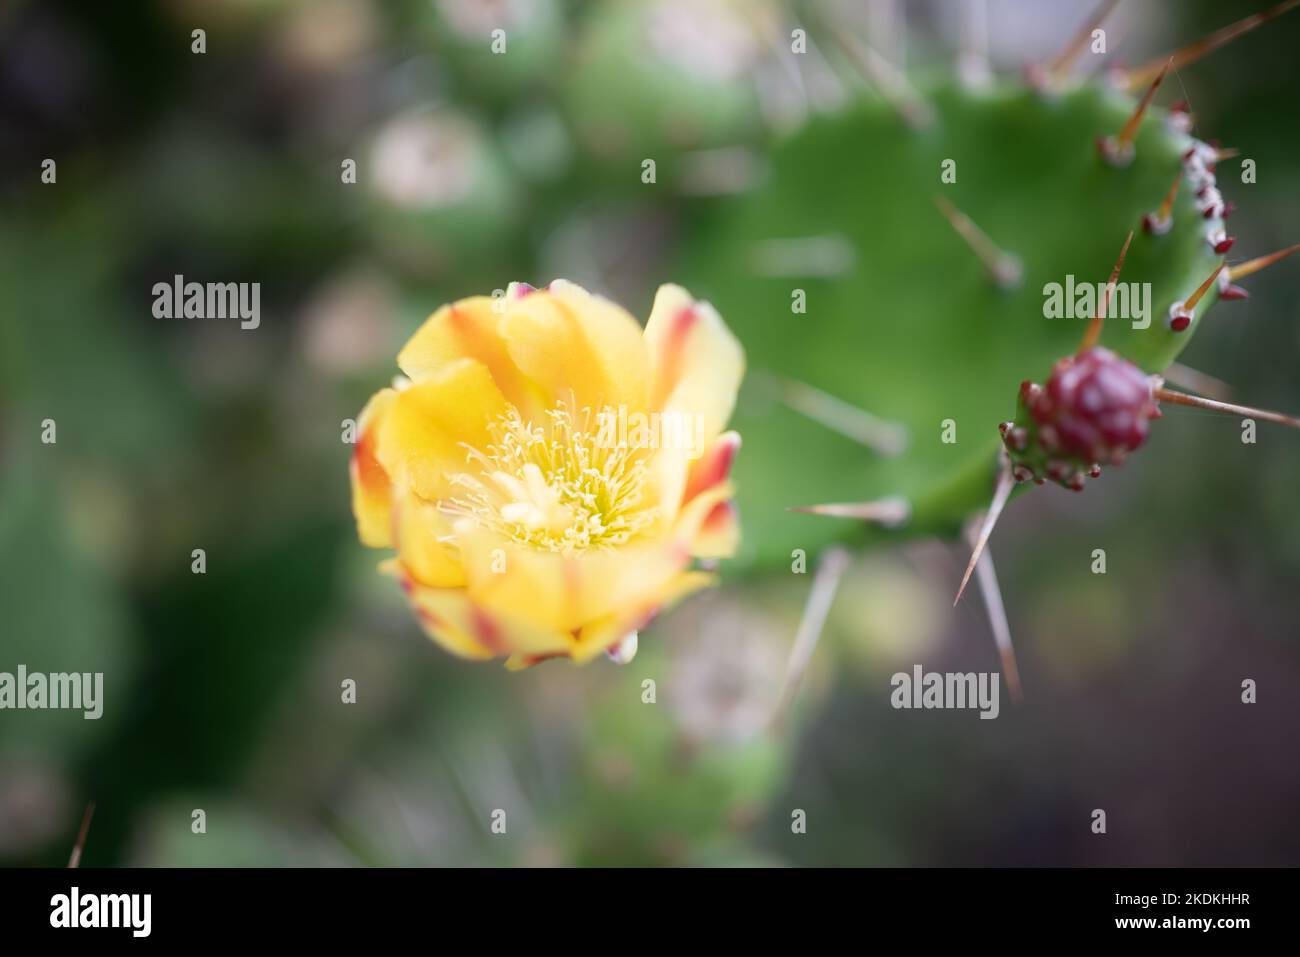 Close-up of yellow flower of prickly pear cactus or Opuntia ficus-indica Stock Photo